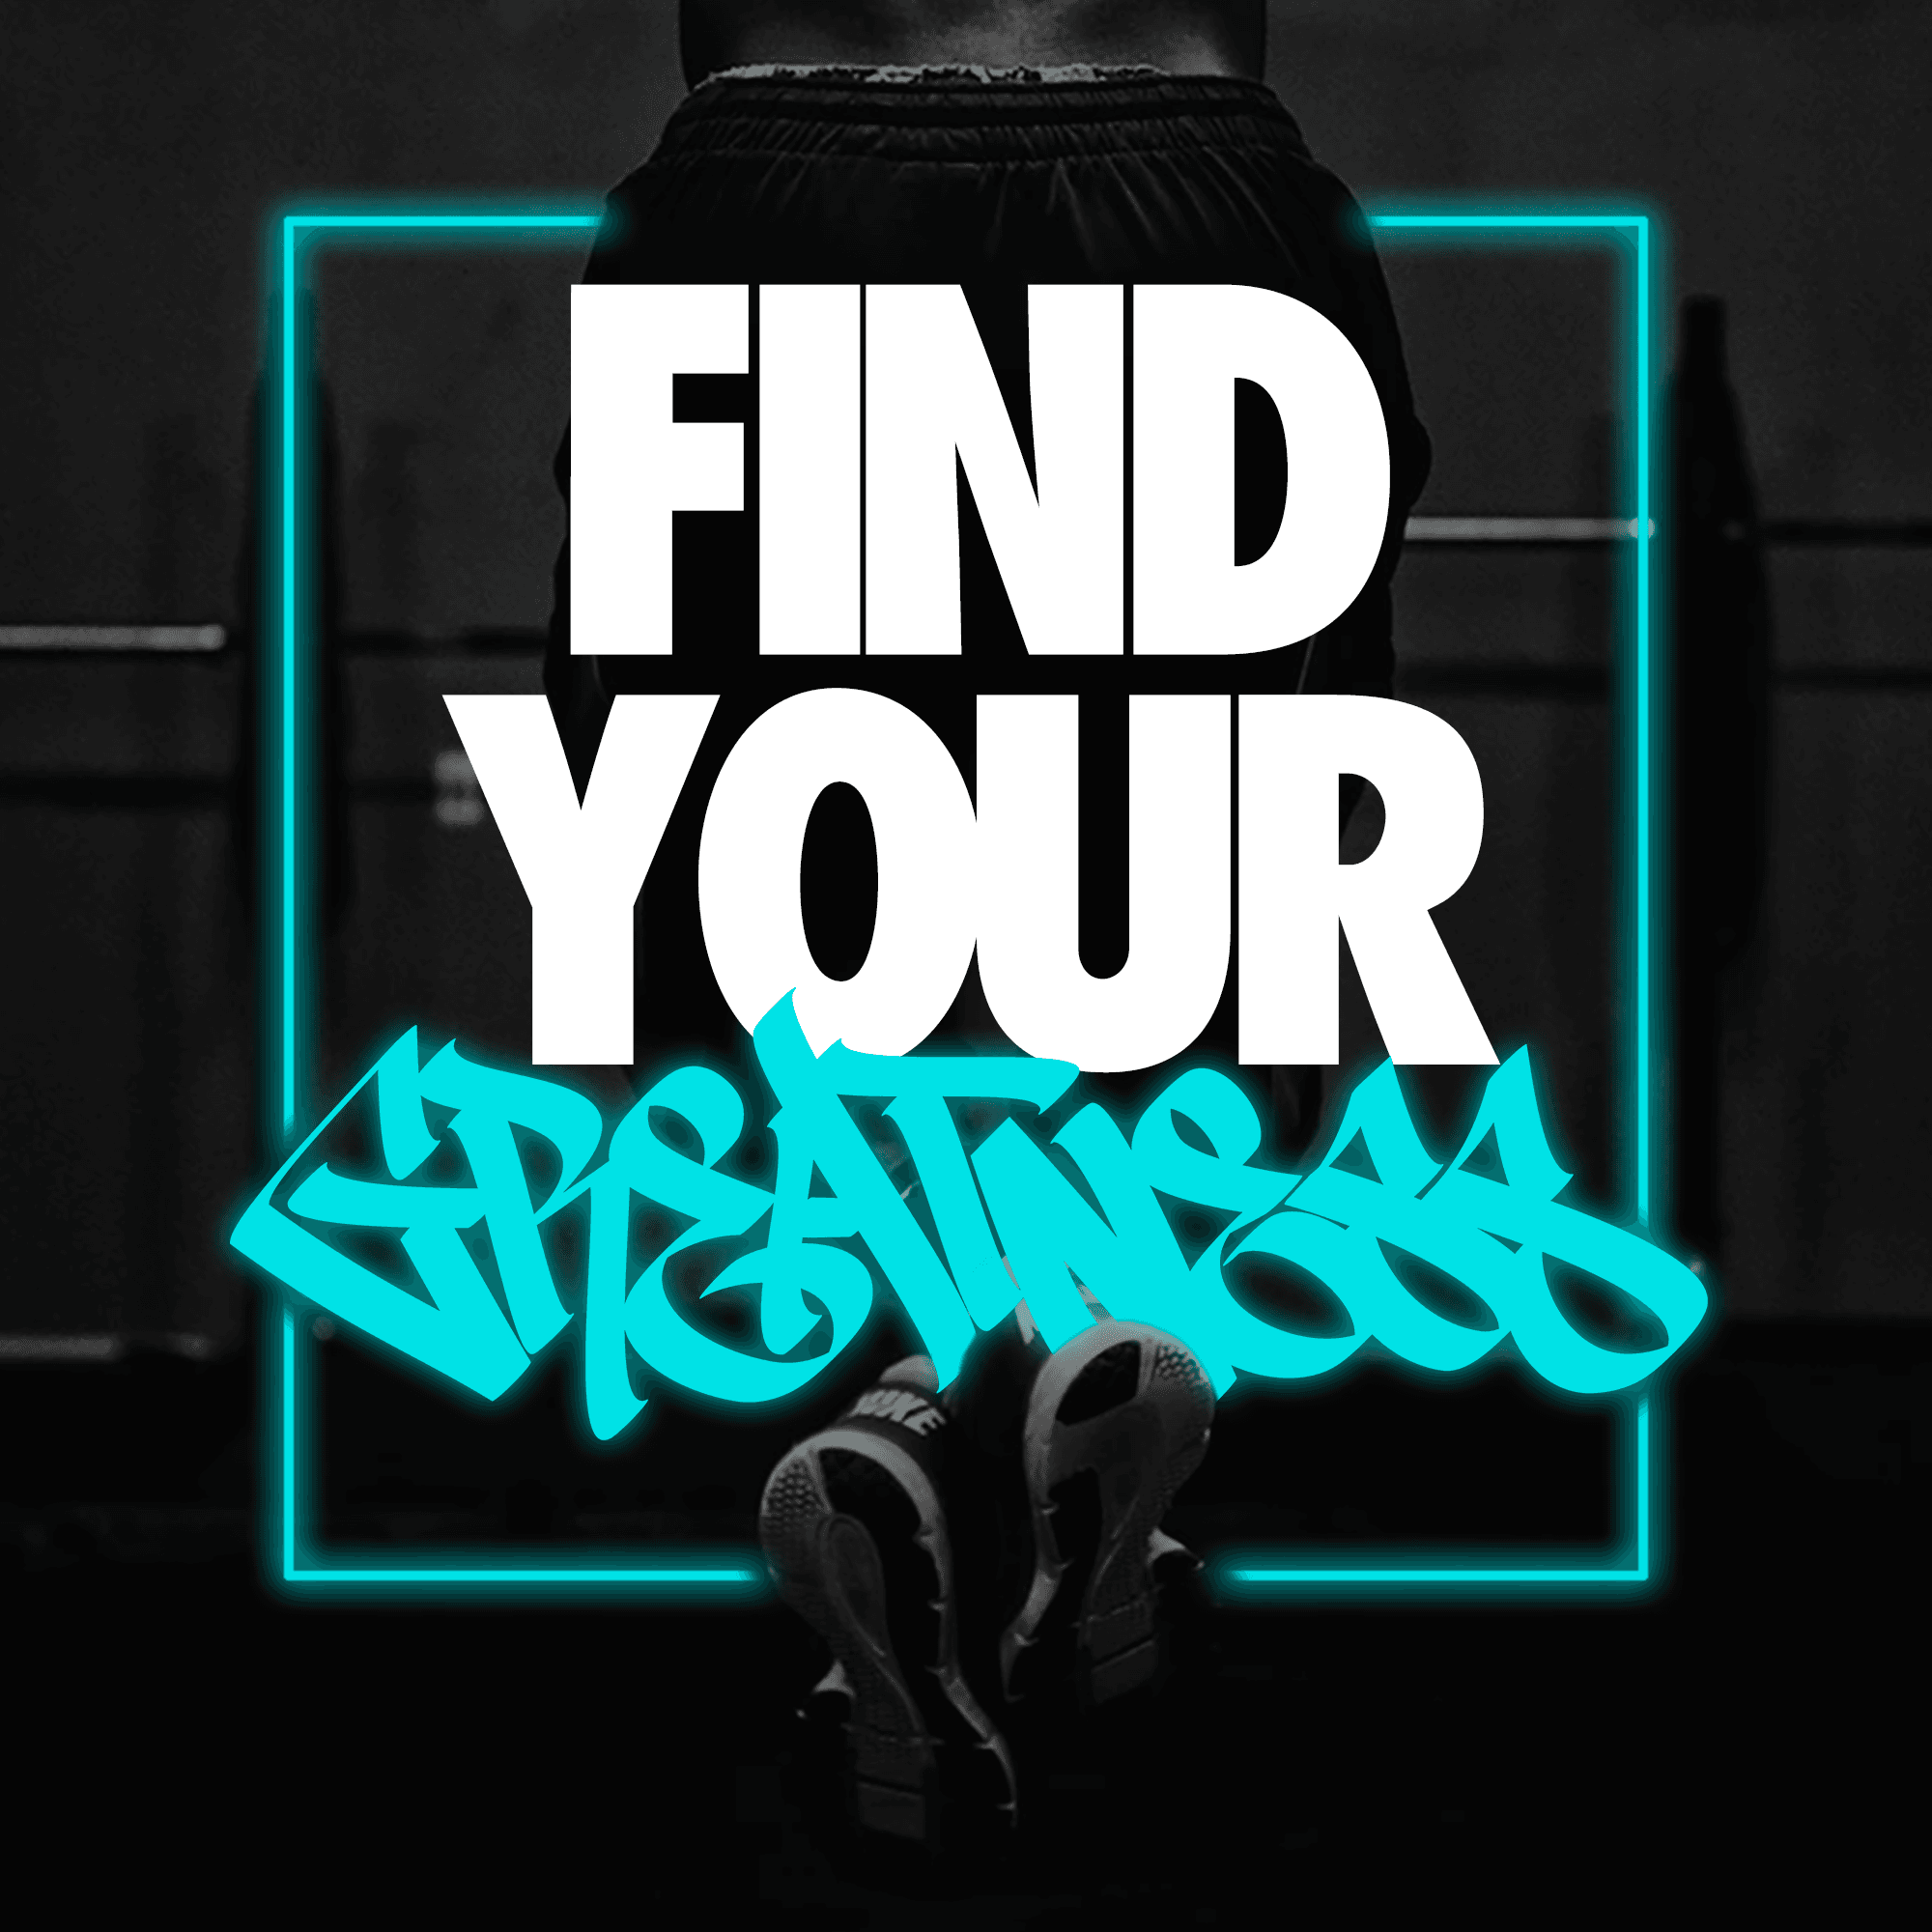 "Find Your Greatness"